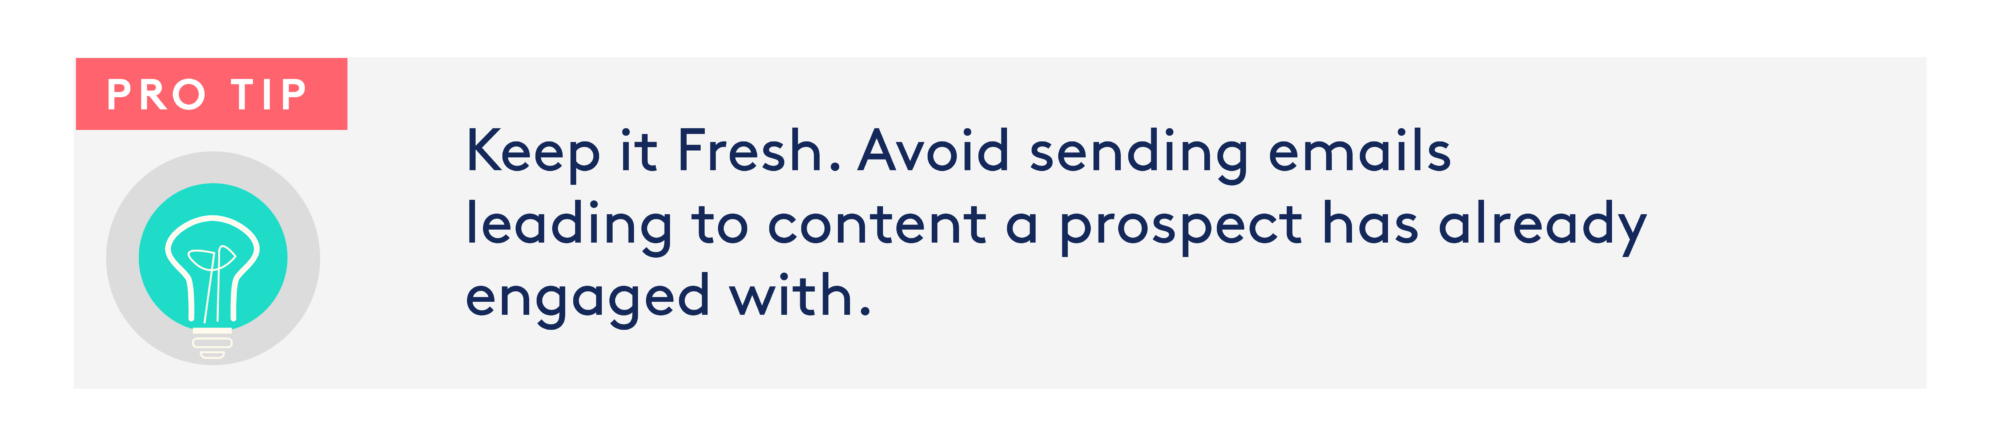 Image: Lightbulb Text: Pro Tip: Keep it Fresh. Avoid sending emails leading to content a prospect has already engaged with.